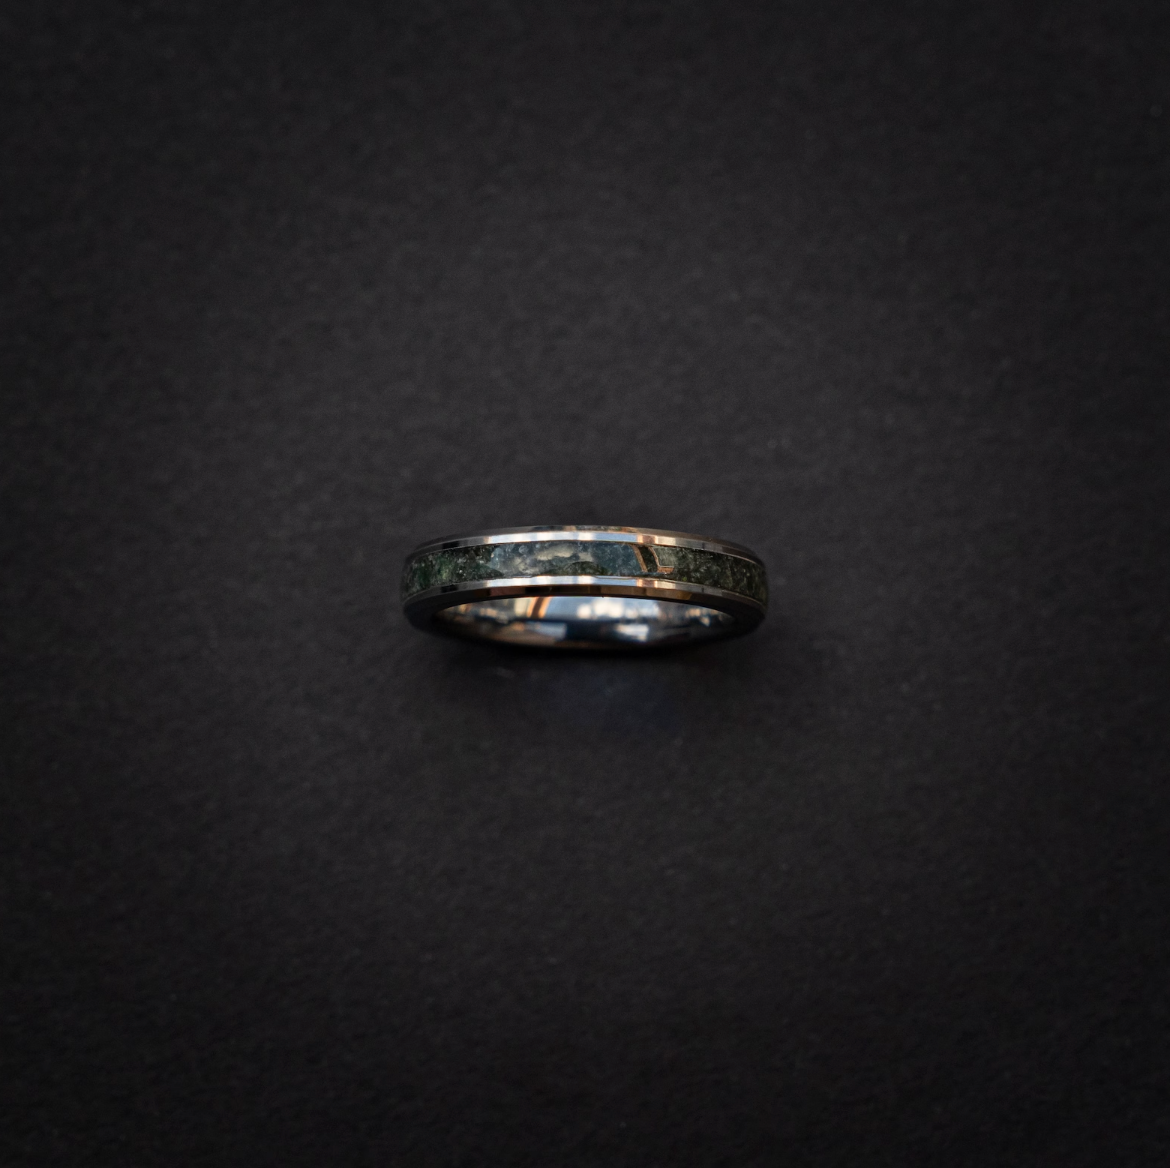 Silver tungsten ring filled with Moss Agate